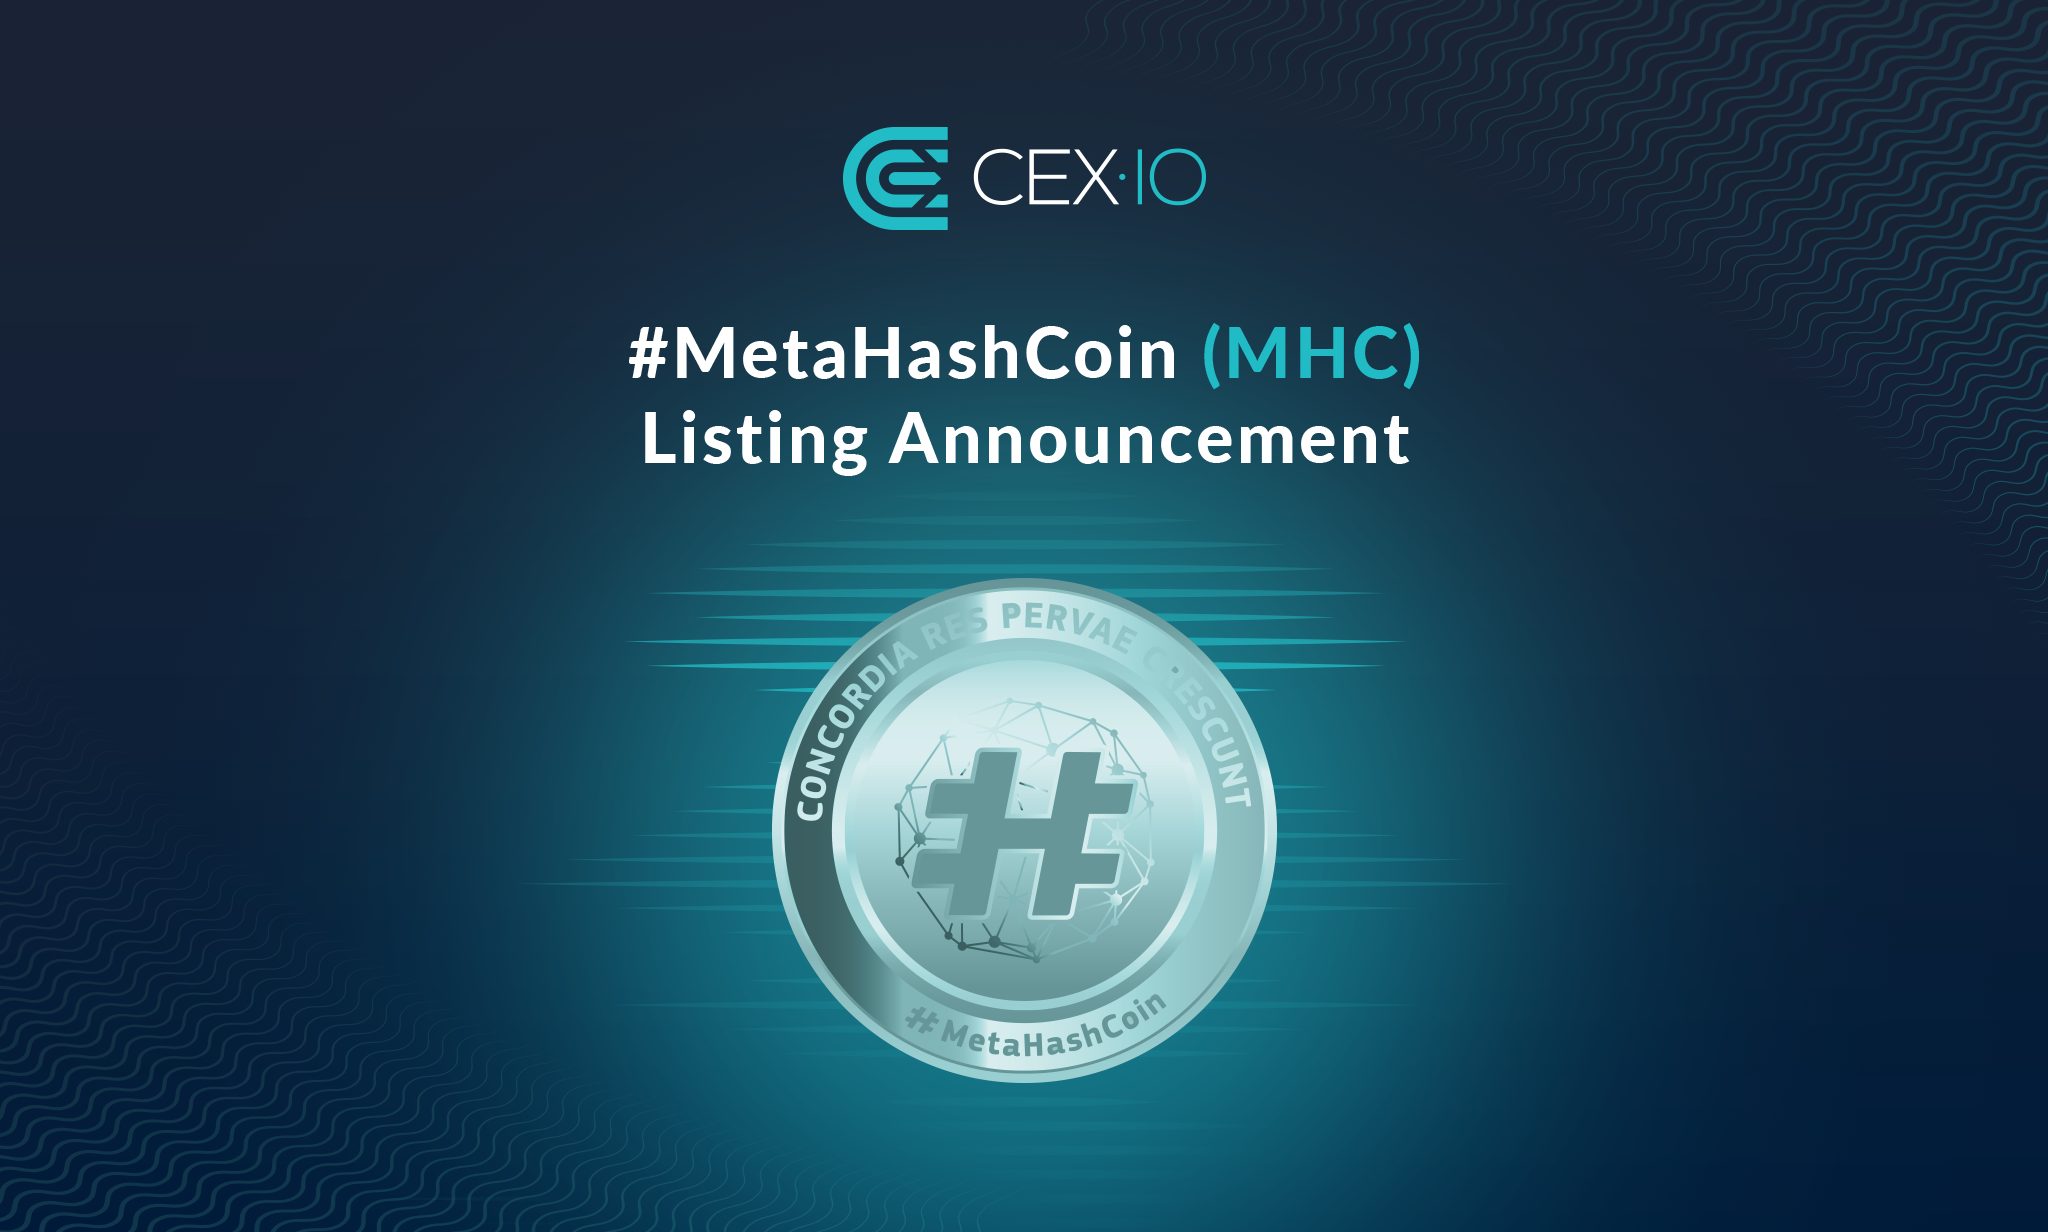 CEX.IO announces the upcoming listing of #MetaHashCoin